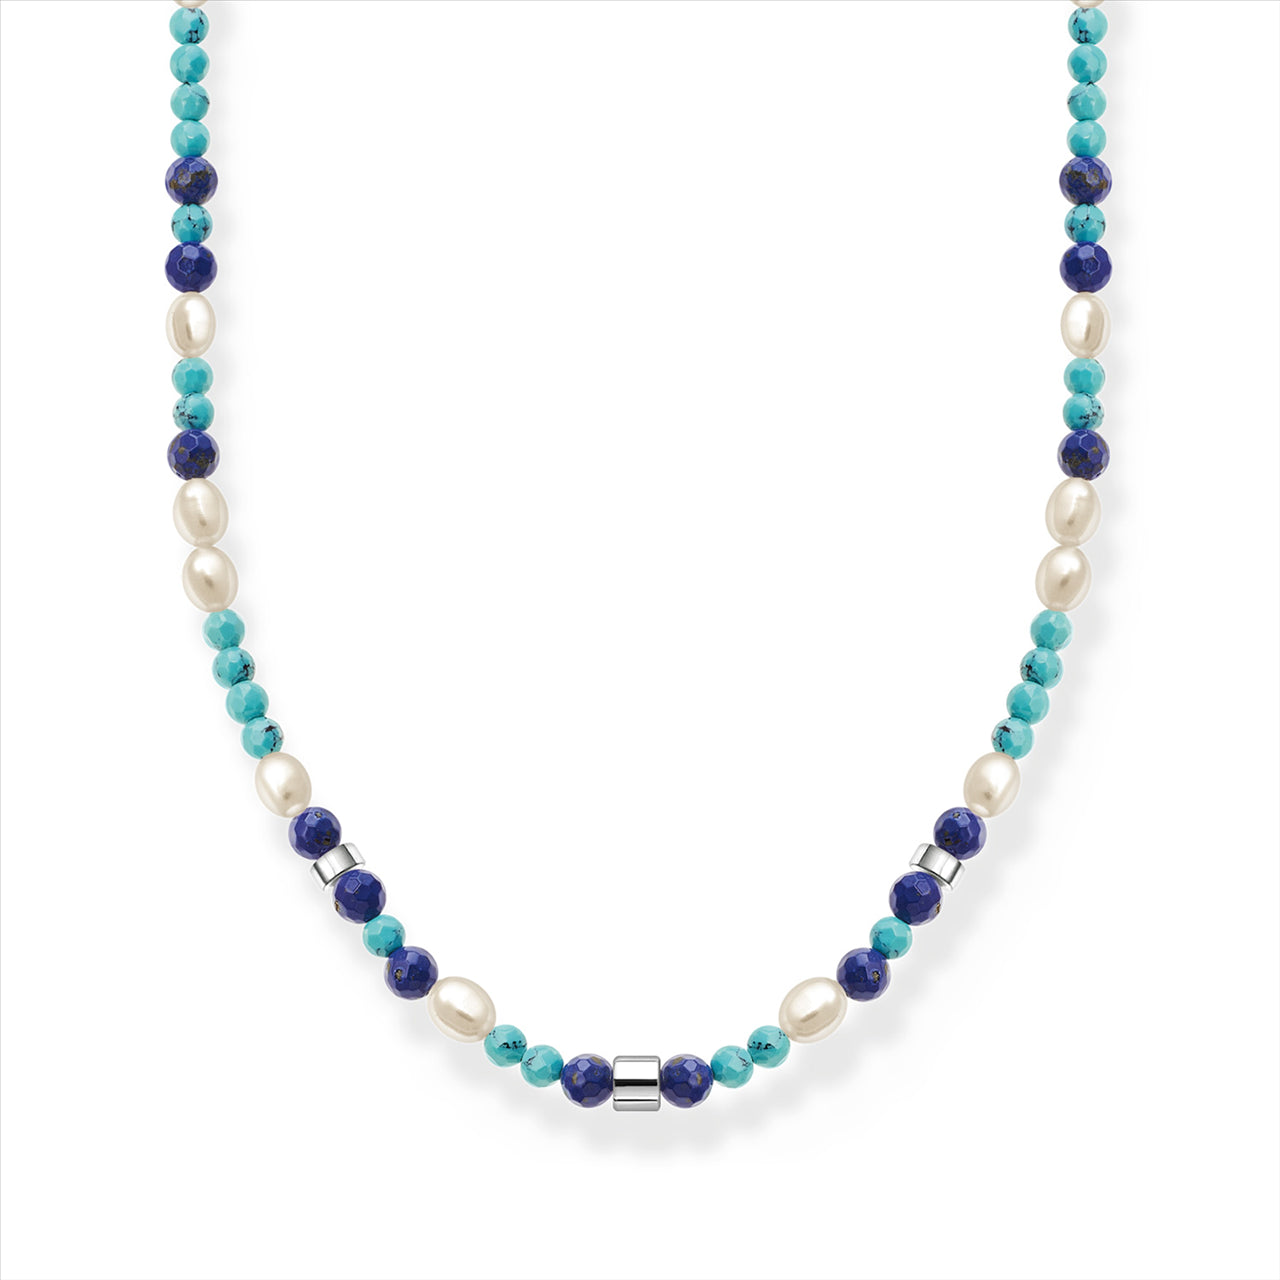 Thomas Sabo Necklace with blue stones and pearls